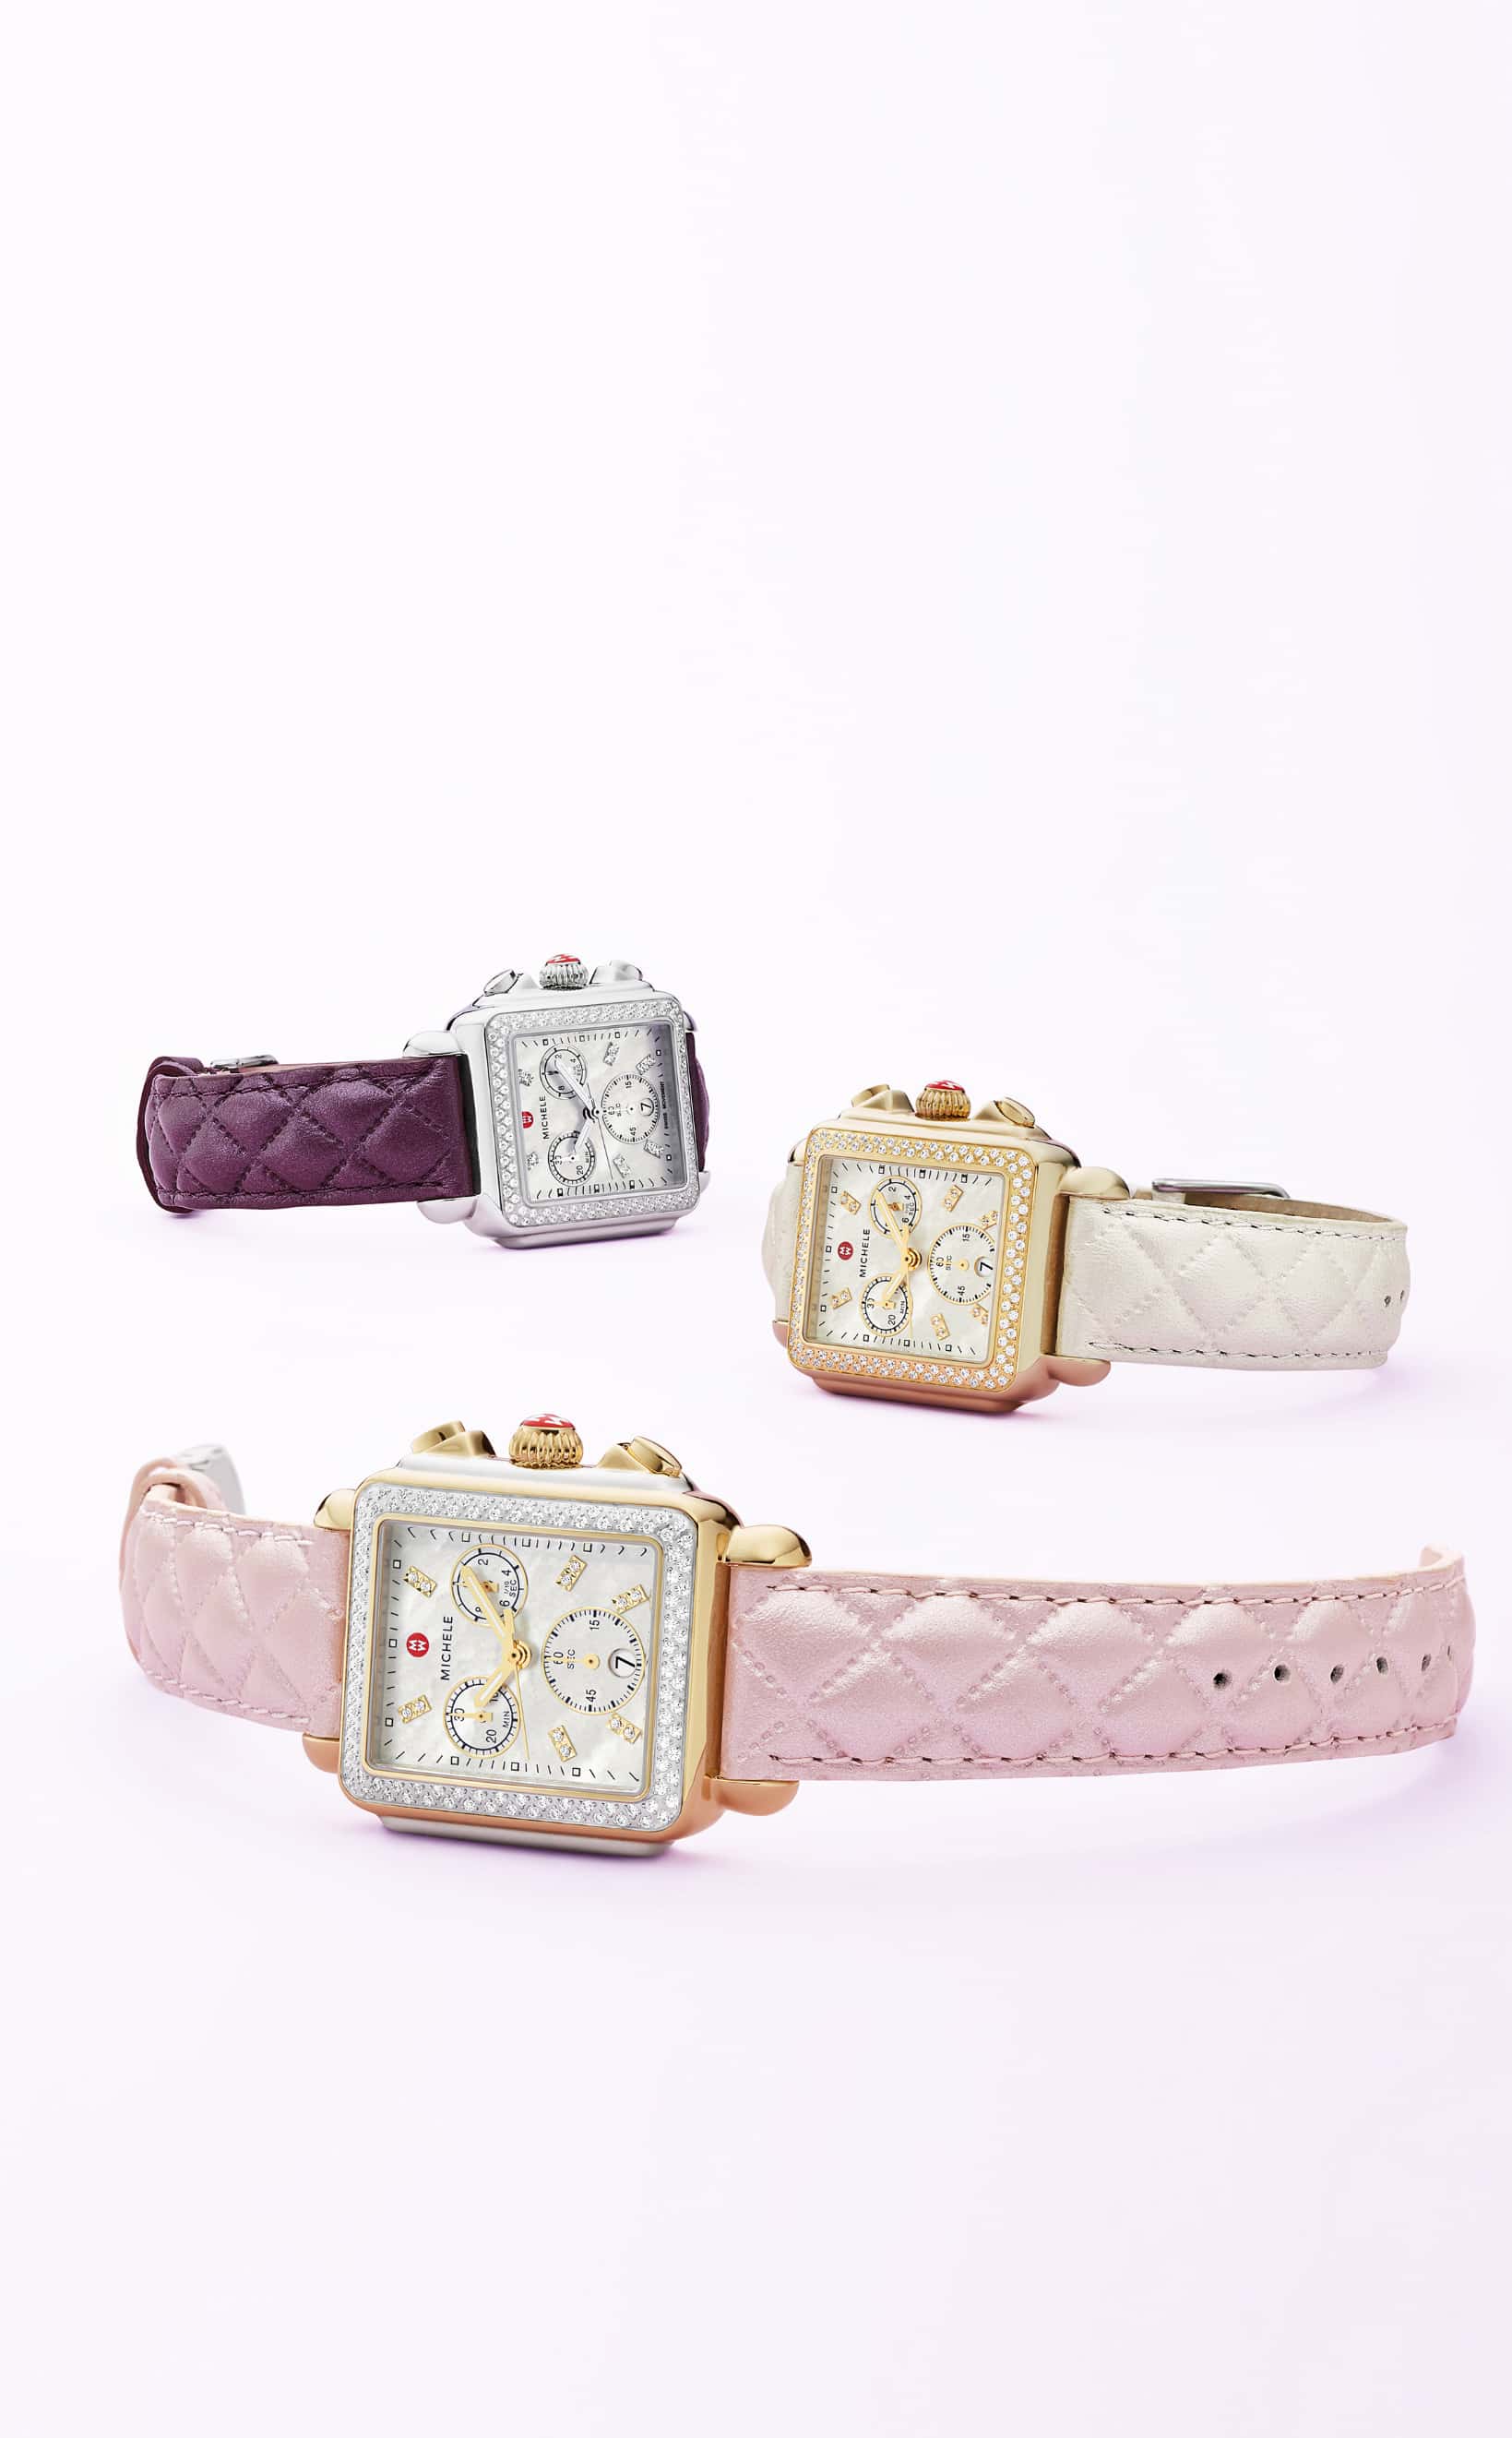 Three Deco watches with purple, pink and white quilted-leather straps.